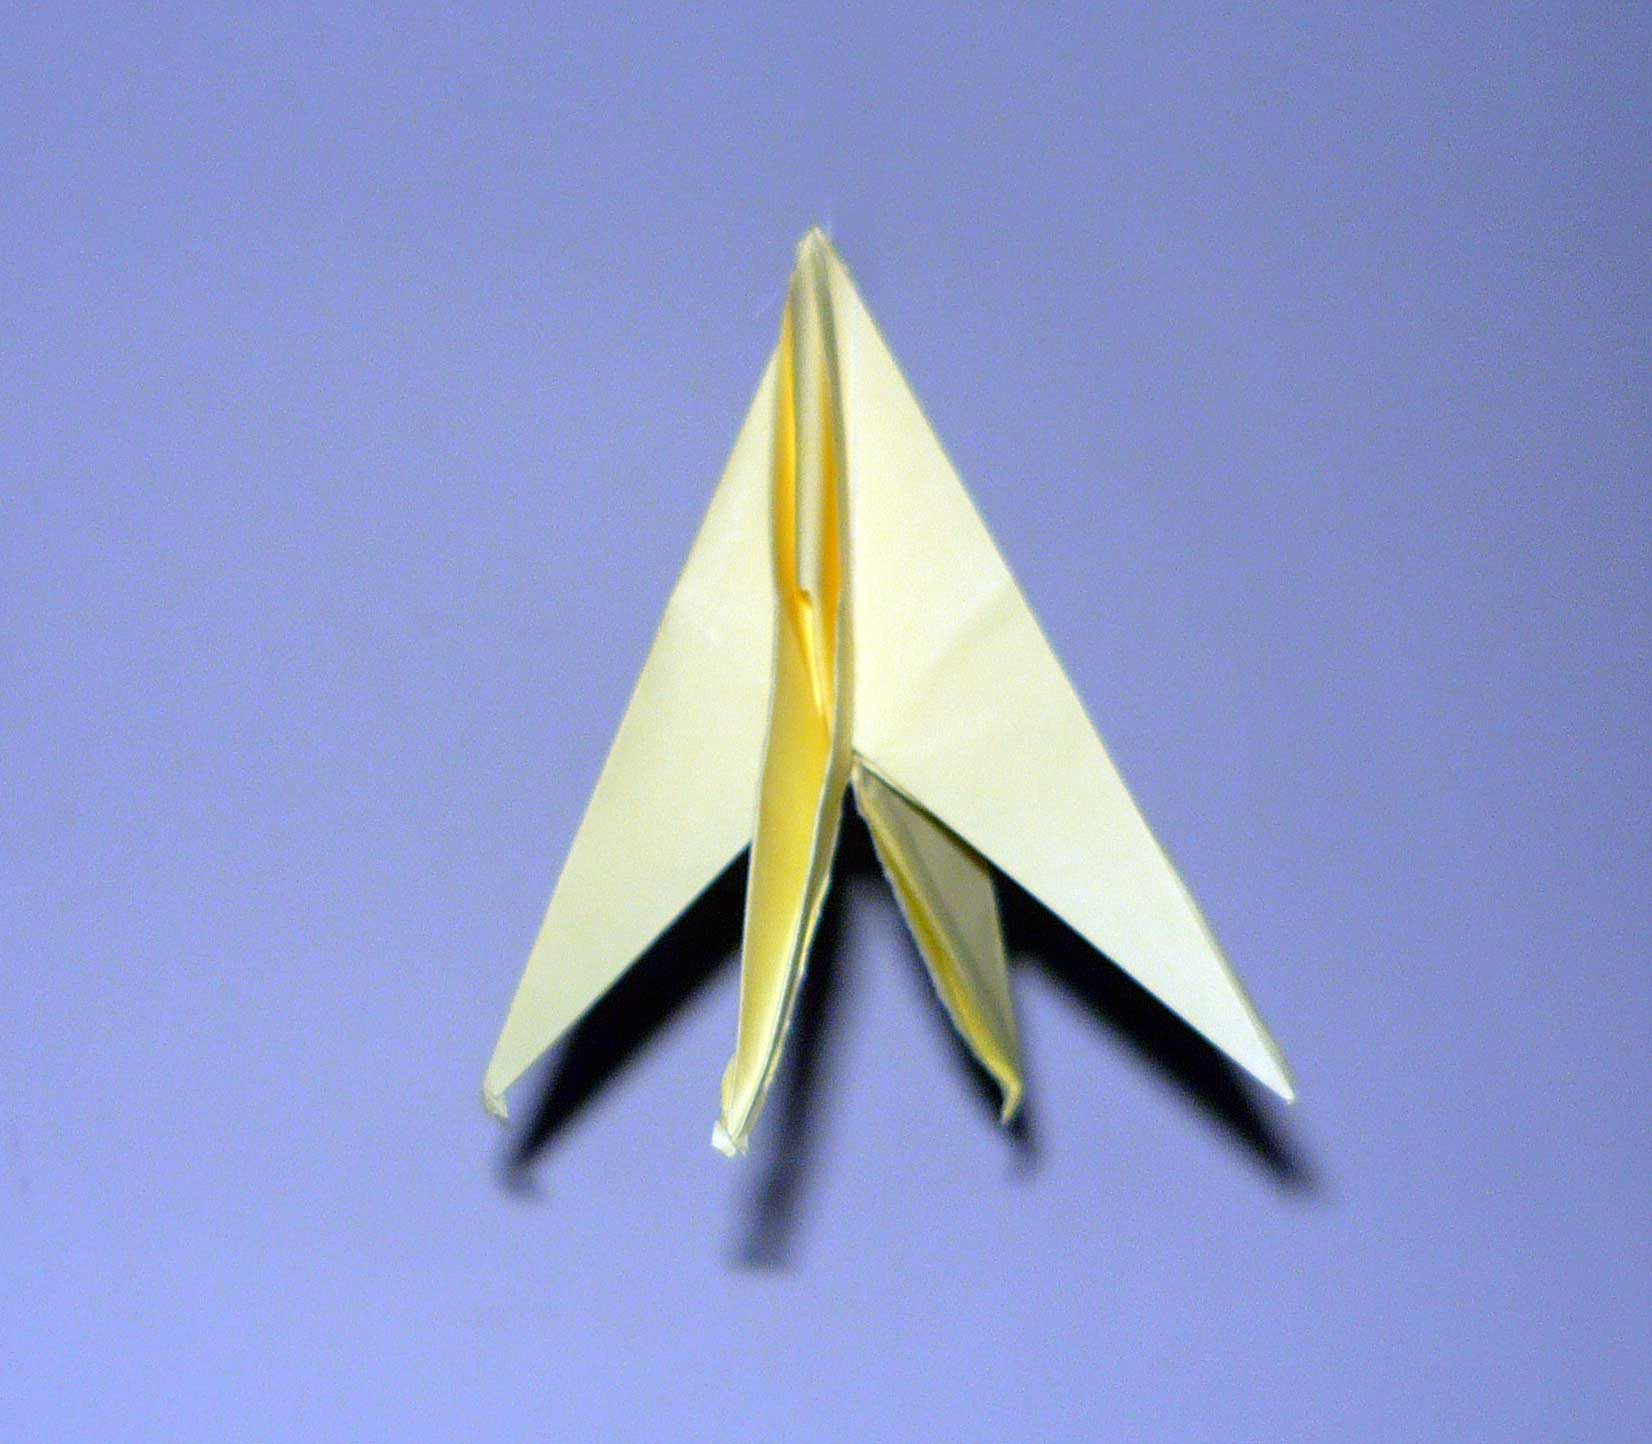 How To Make Origami Rocket Rocket Origami It Flies How To Build Origami